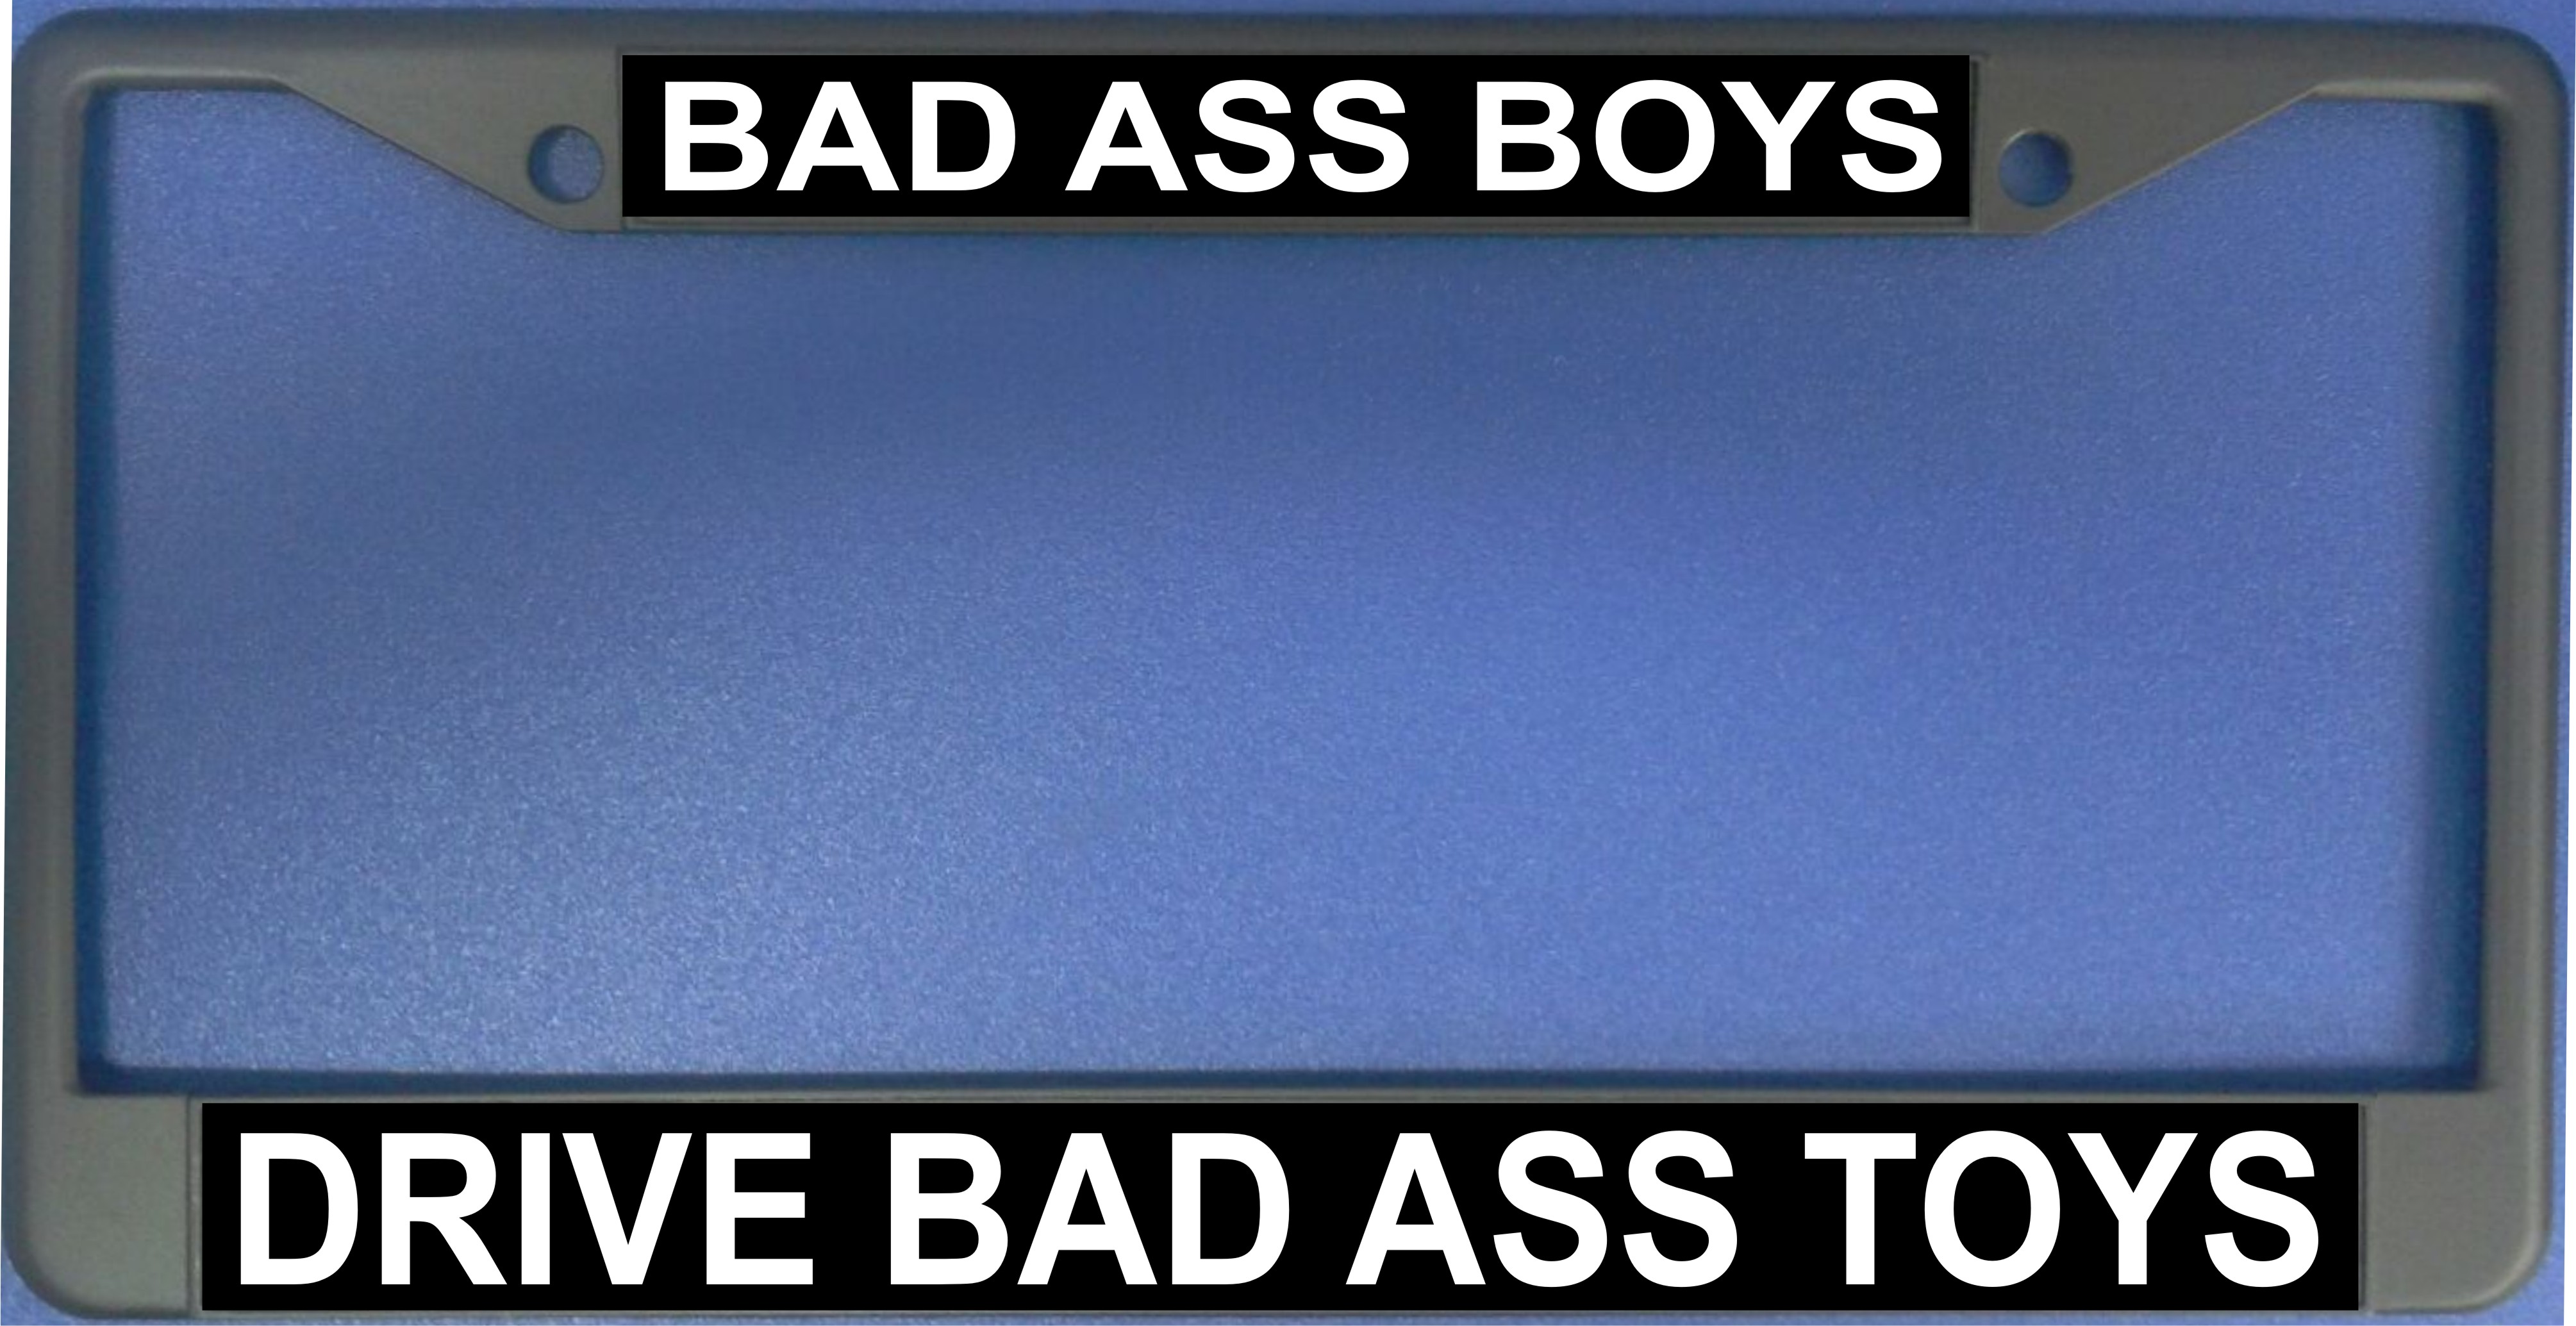 Bad Ass Boys Drive Bad Ass TOYS License Plate Frame   Free Screw Caps with this Frame